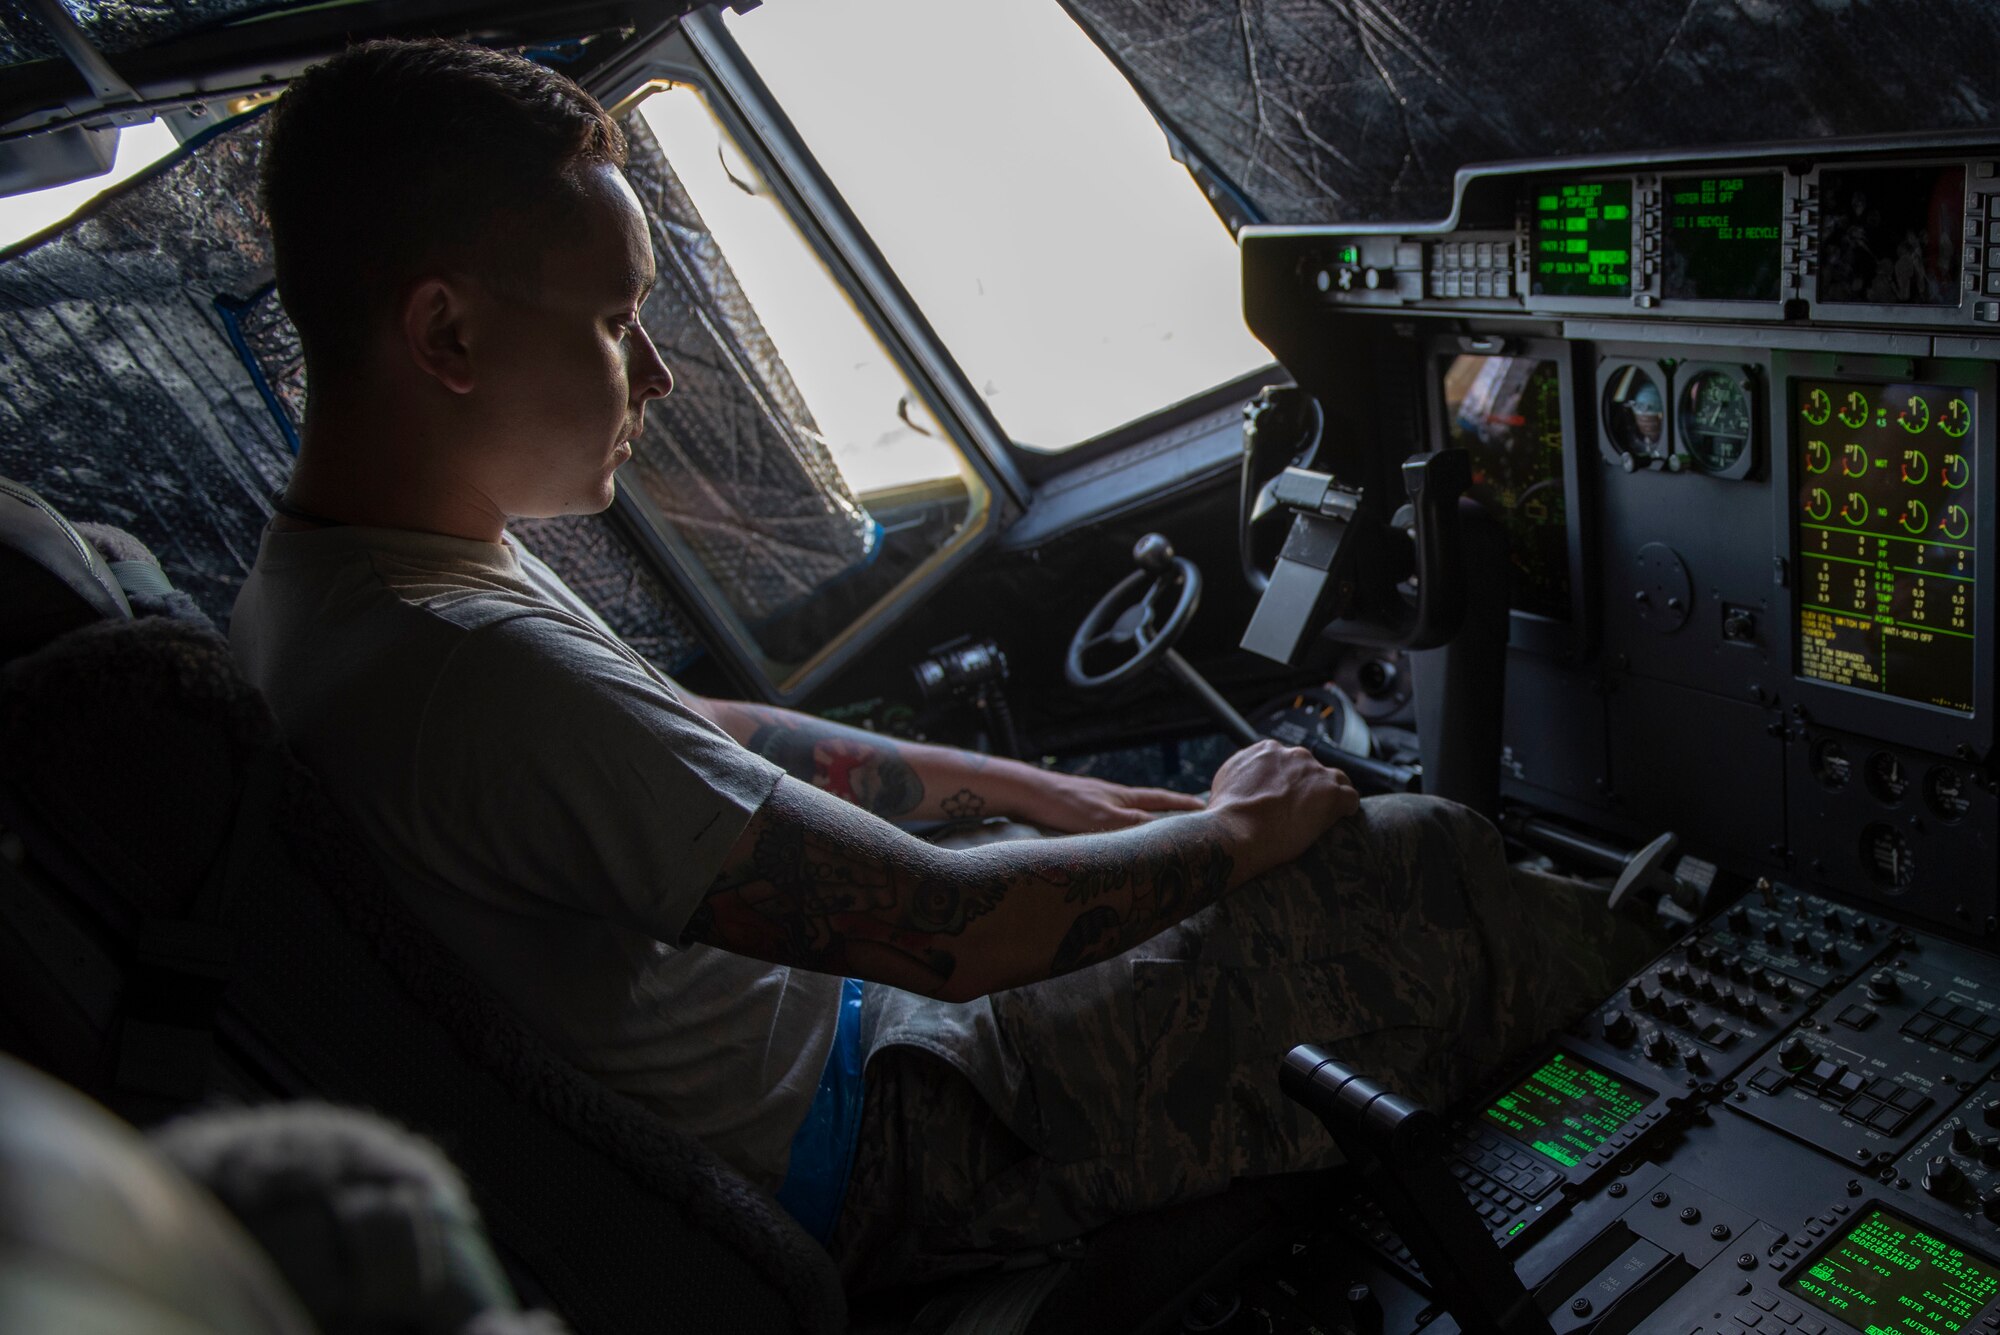 Staff Sgt. Matthew Haston, 374th Aircraft Maintenance Squadron electrical and environmental systems craftsman, goes over the C-130J Super Hercules’ instruments during a pre-flight inspection during Operation Christmas Drop 2018 at Andersen Air Force Base, Guam, Dec. 9, 2018.